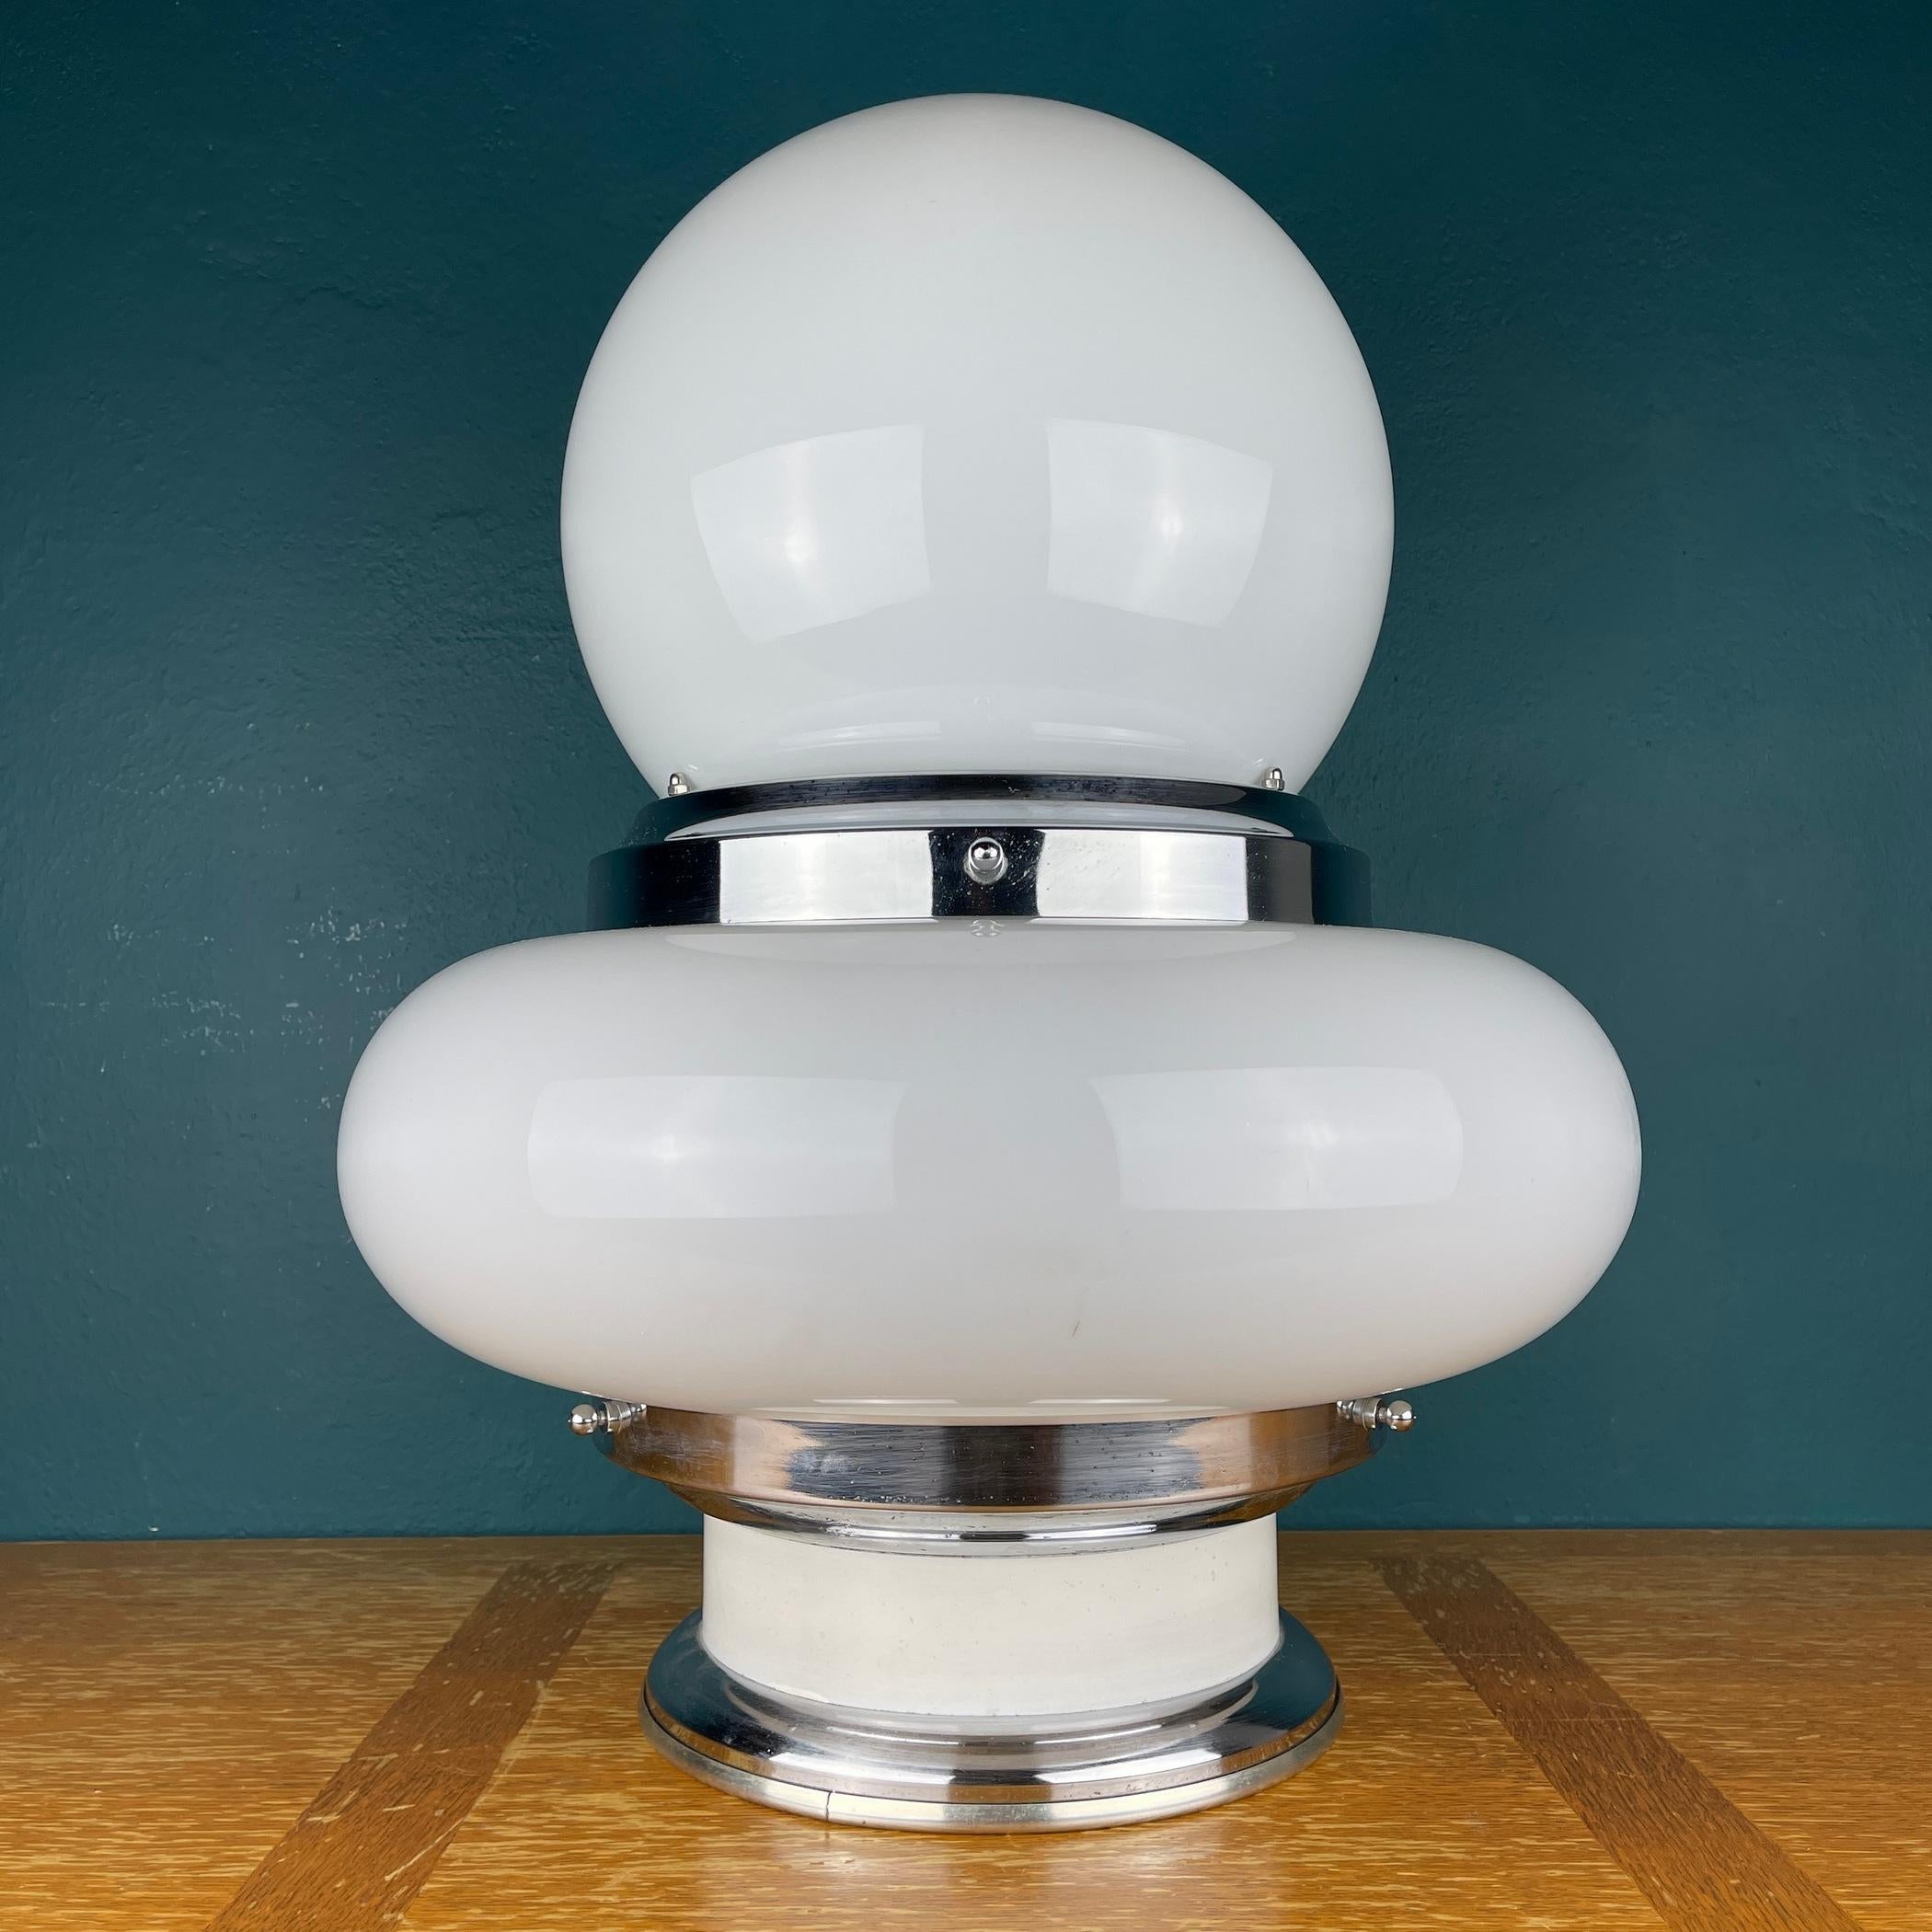 Vintage large white opaline glass table or floor lamp UFO was made in Italy in the 1970s. Retro lamp will bring to your home the atmosphere of 70s Italy, the era of the space age. A mid-century table lamp will look great in an Art Deco or